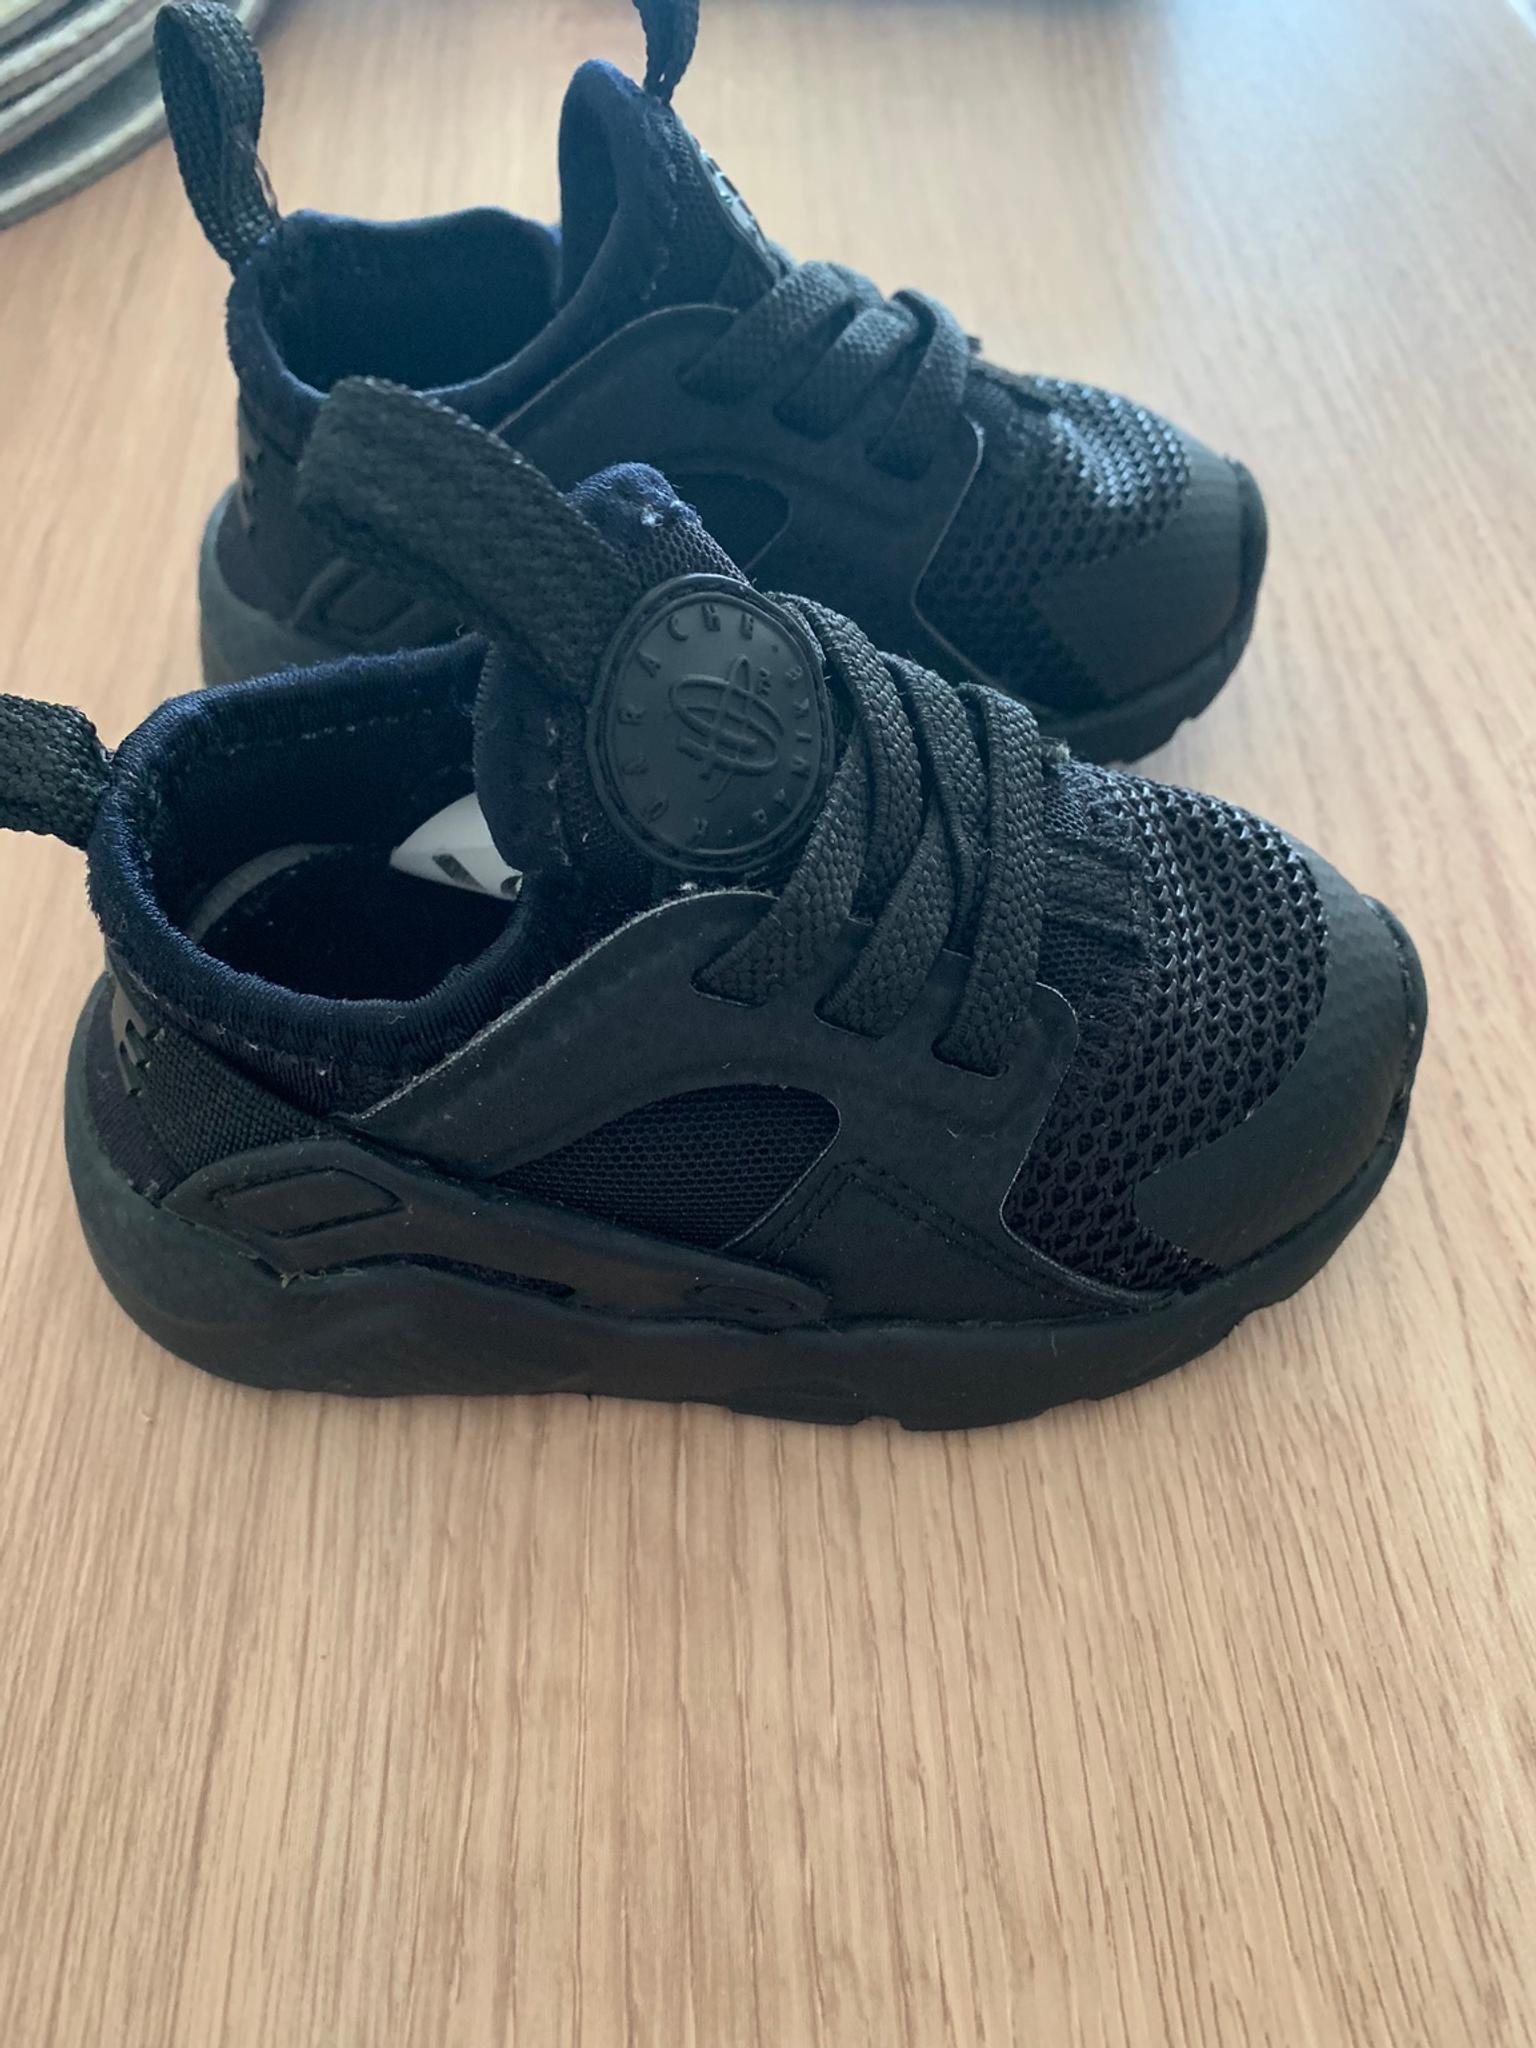 used huaraches for sale